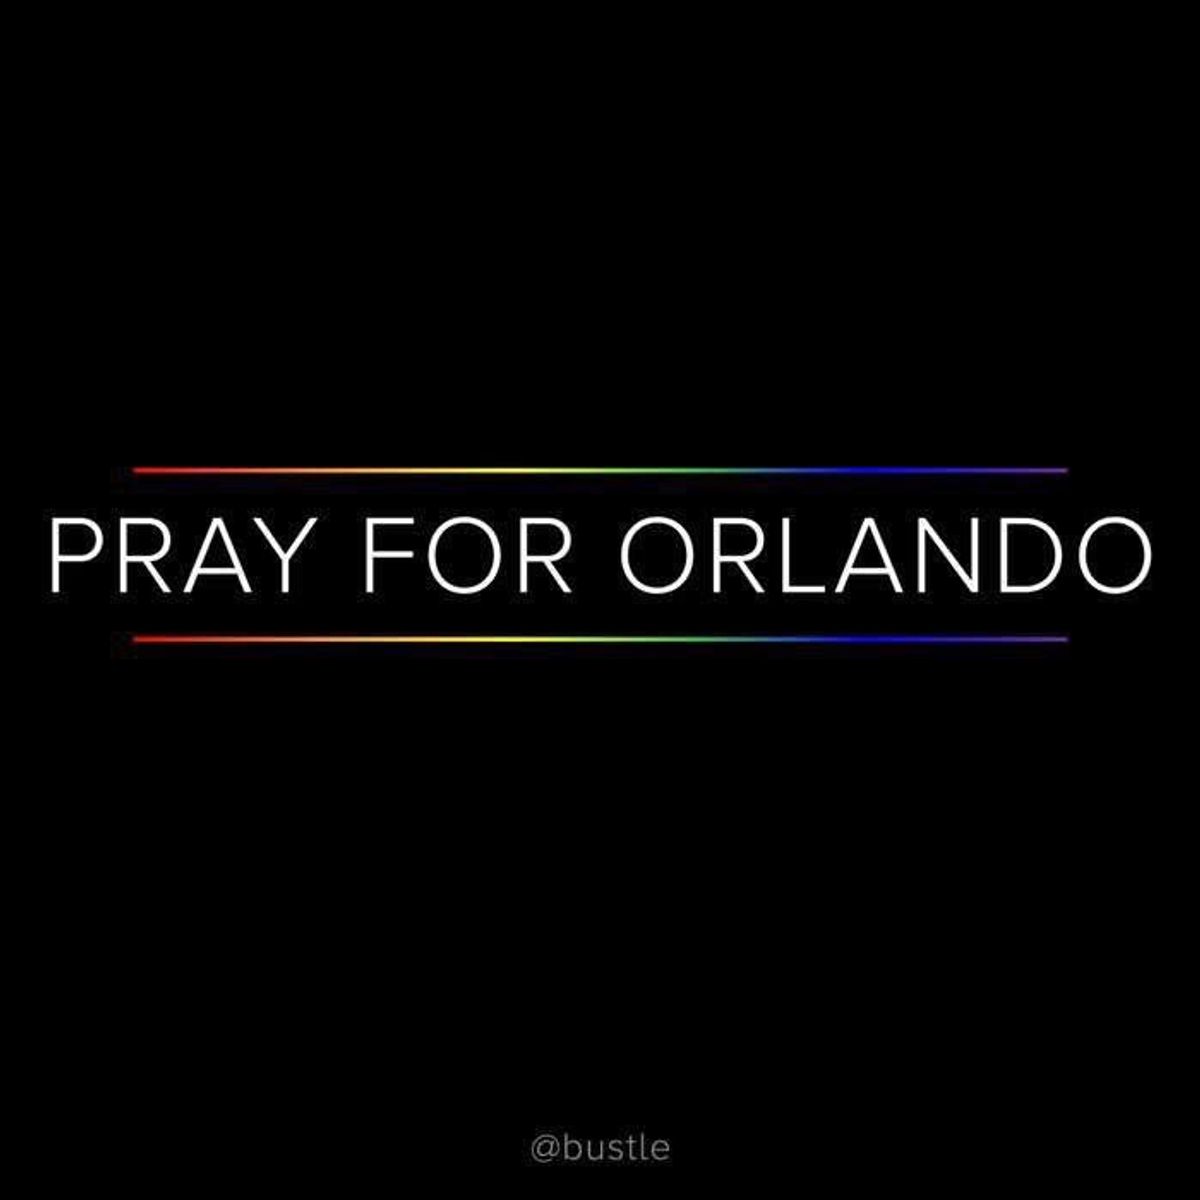 We're Praying For Orlando, And It's Working